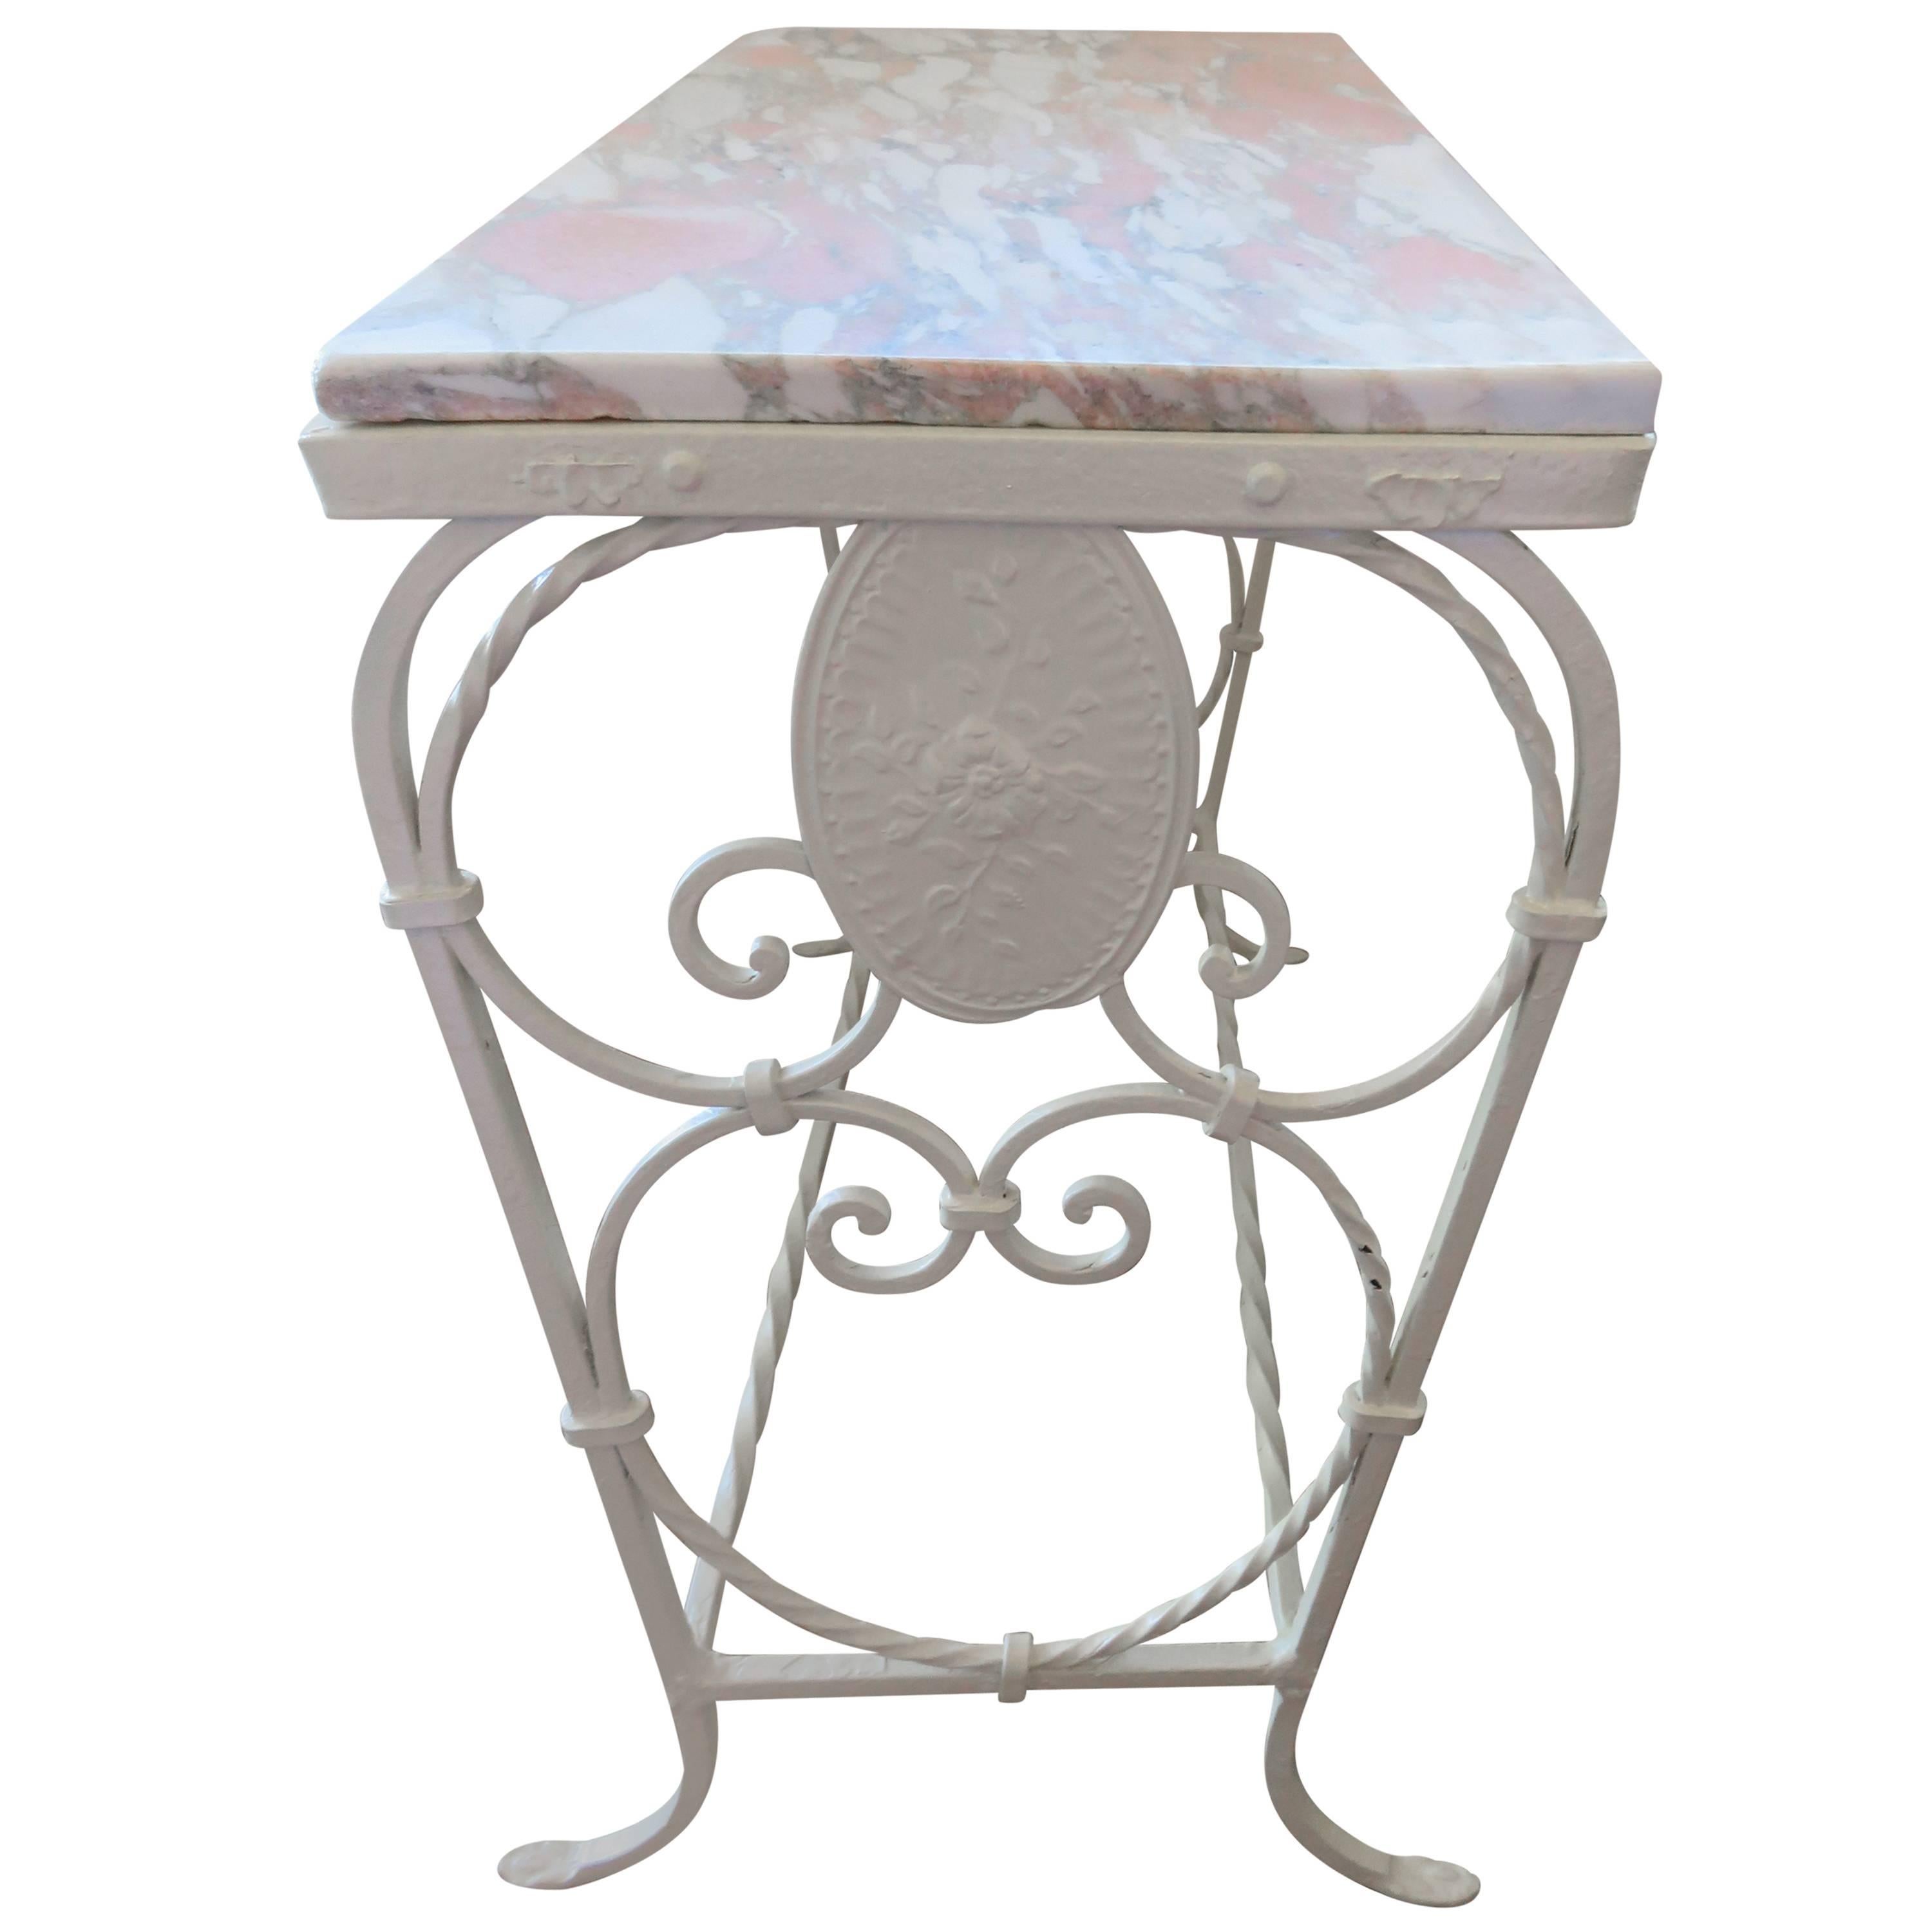 1920s, French Art Nouveau Marble and Decorated Iron Side Table